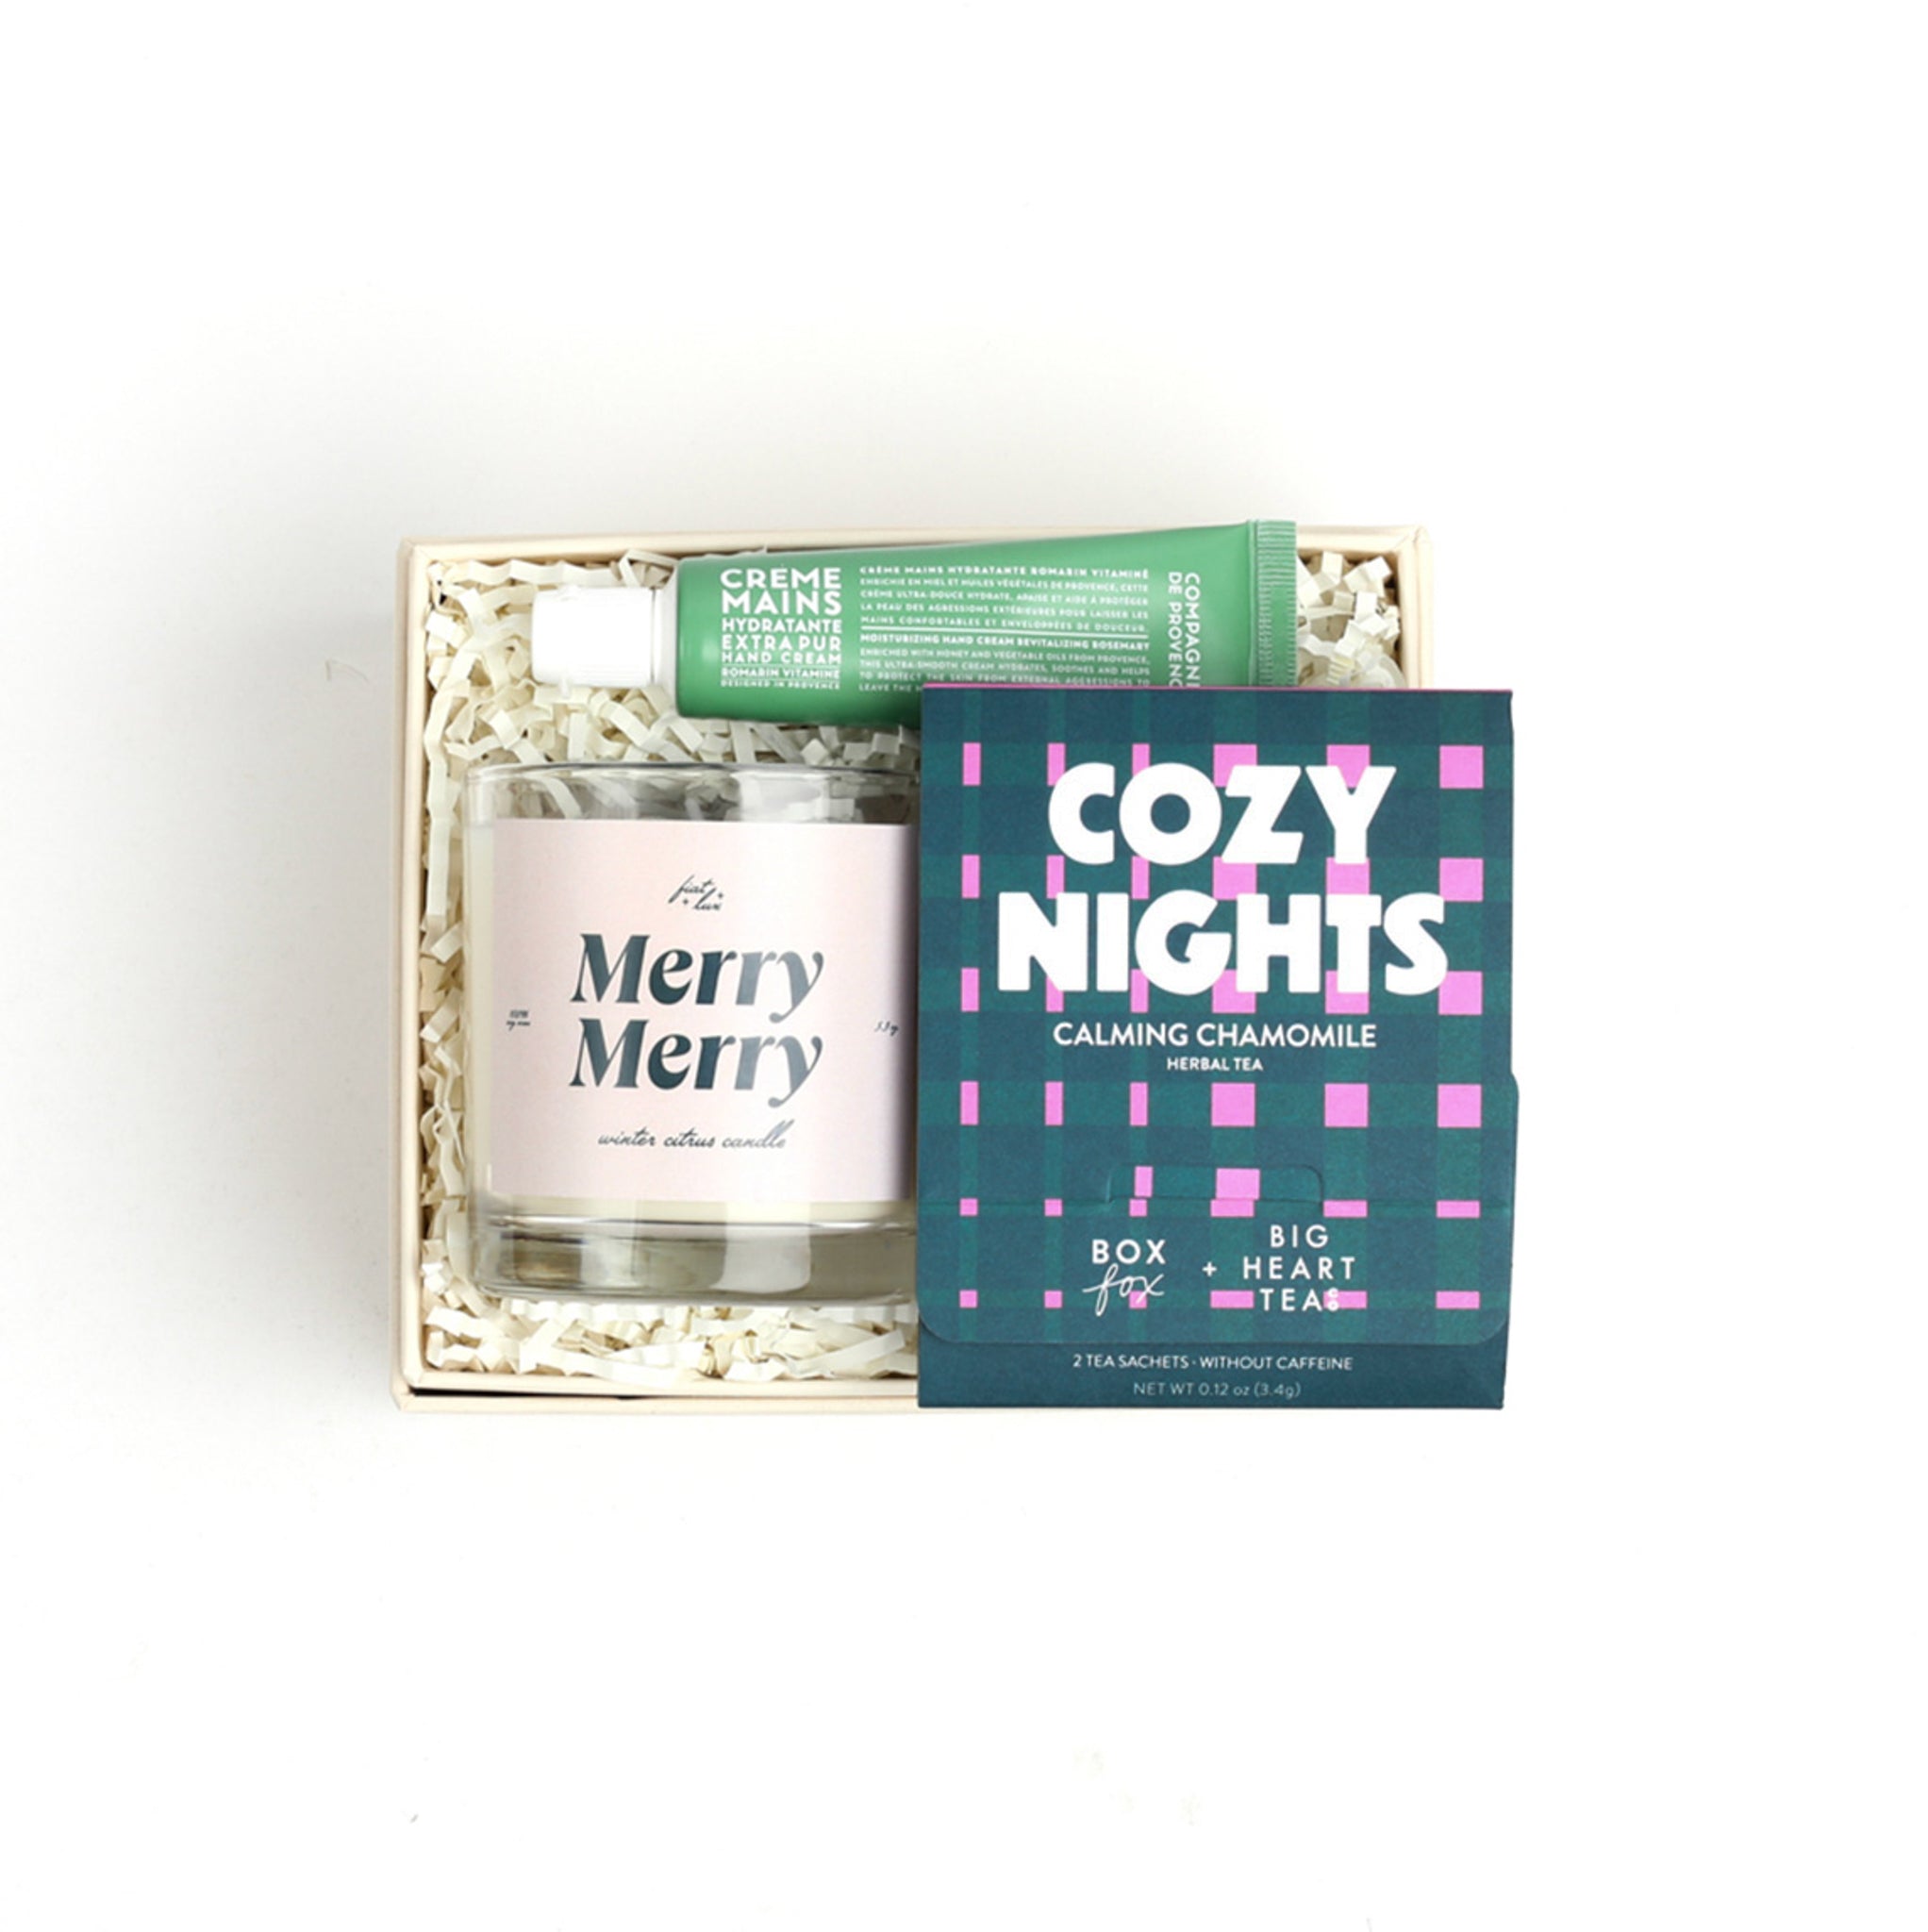 BOXFOX Mini creme gift box packed with rosemary hand creme, merry merry candle and cozy nights sachet tea